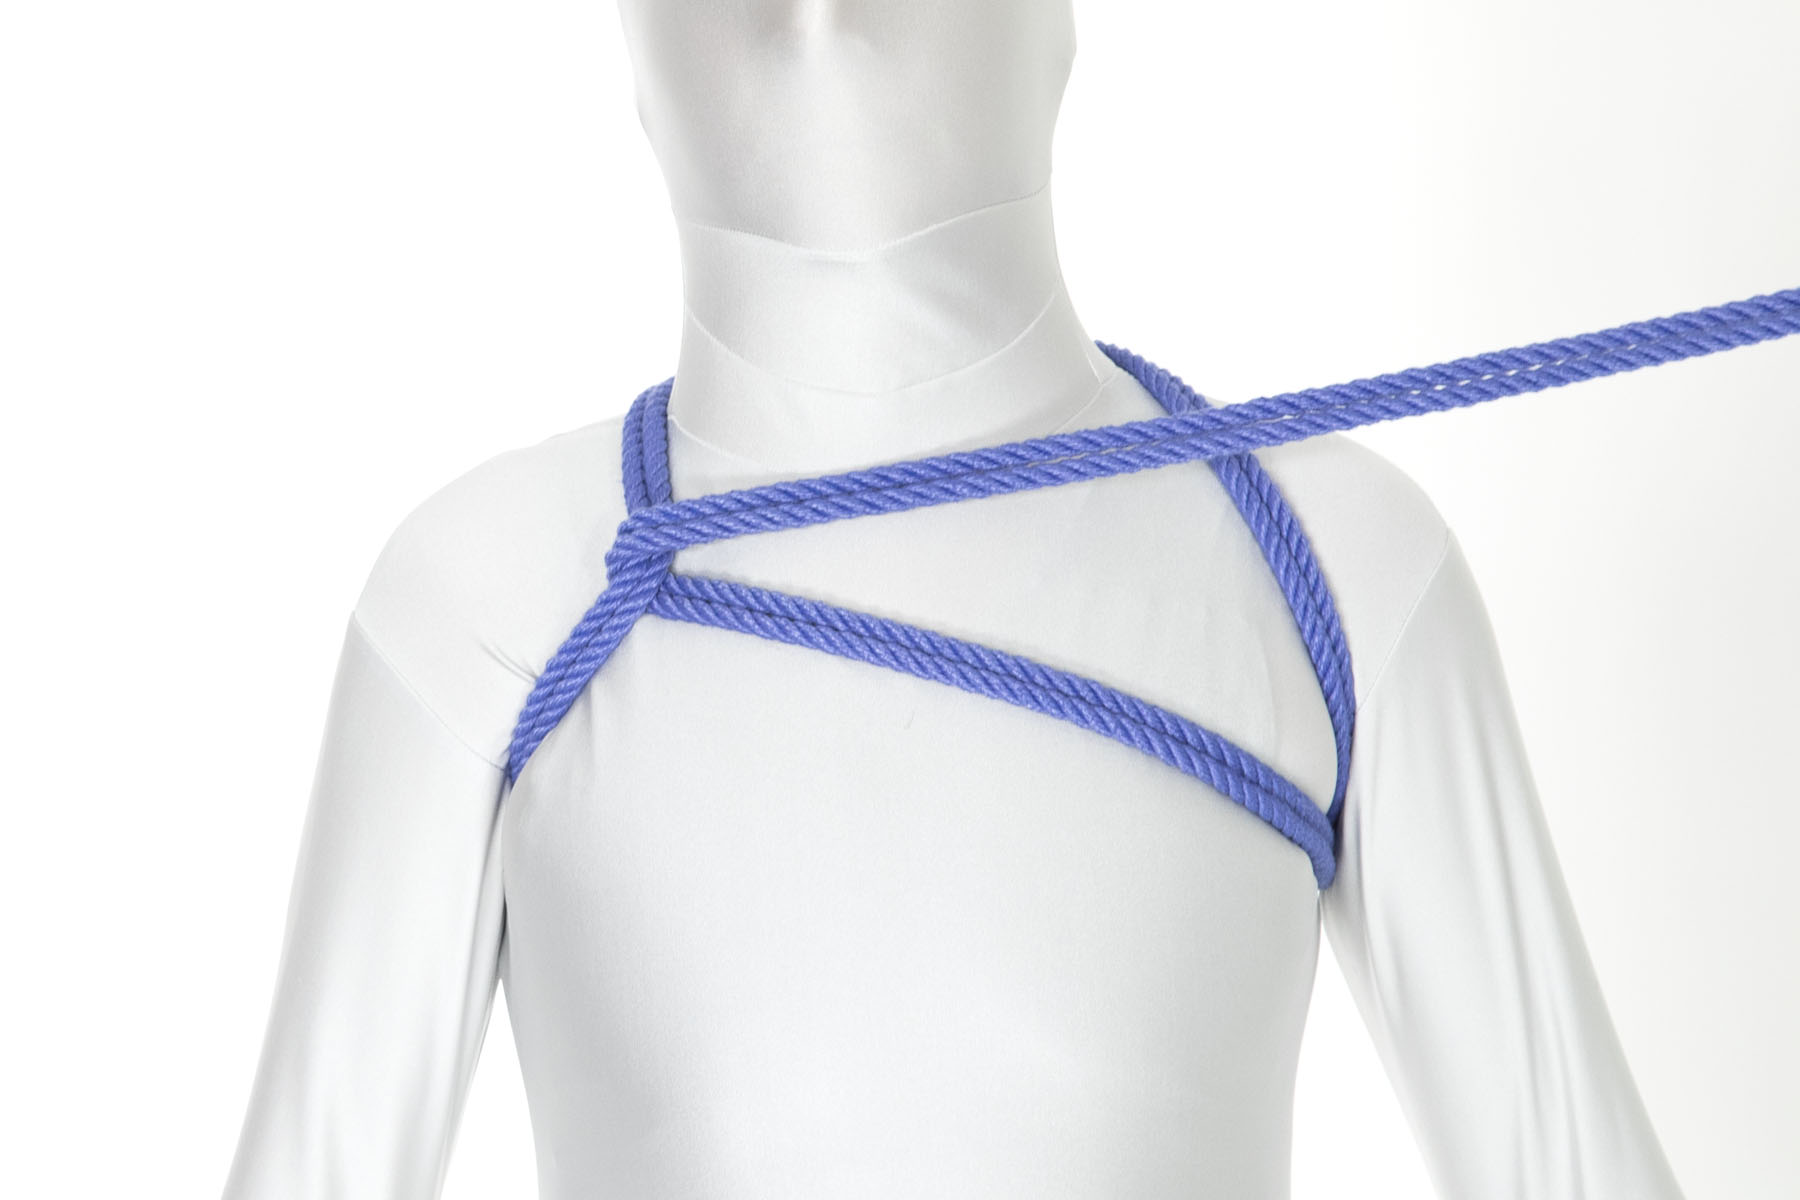 The rope goes under the right shoulder line and doubles back across it, travelling horizontally across the chest toward the left shoulder.